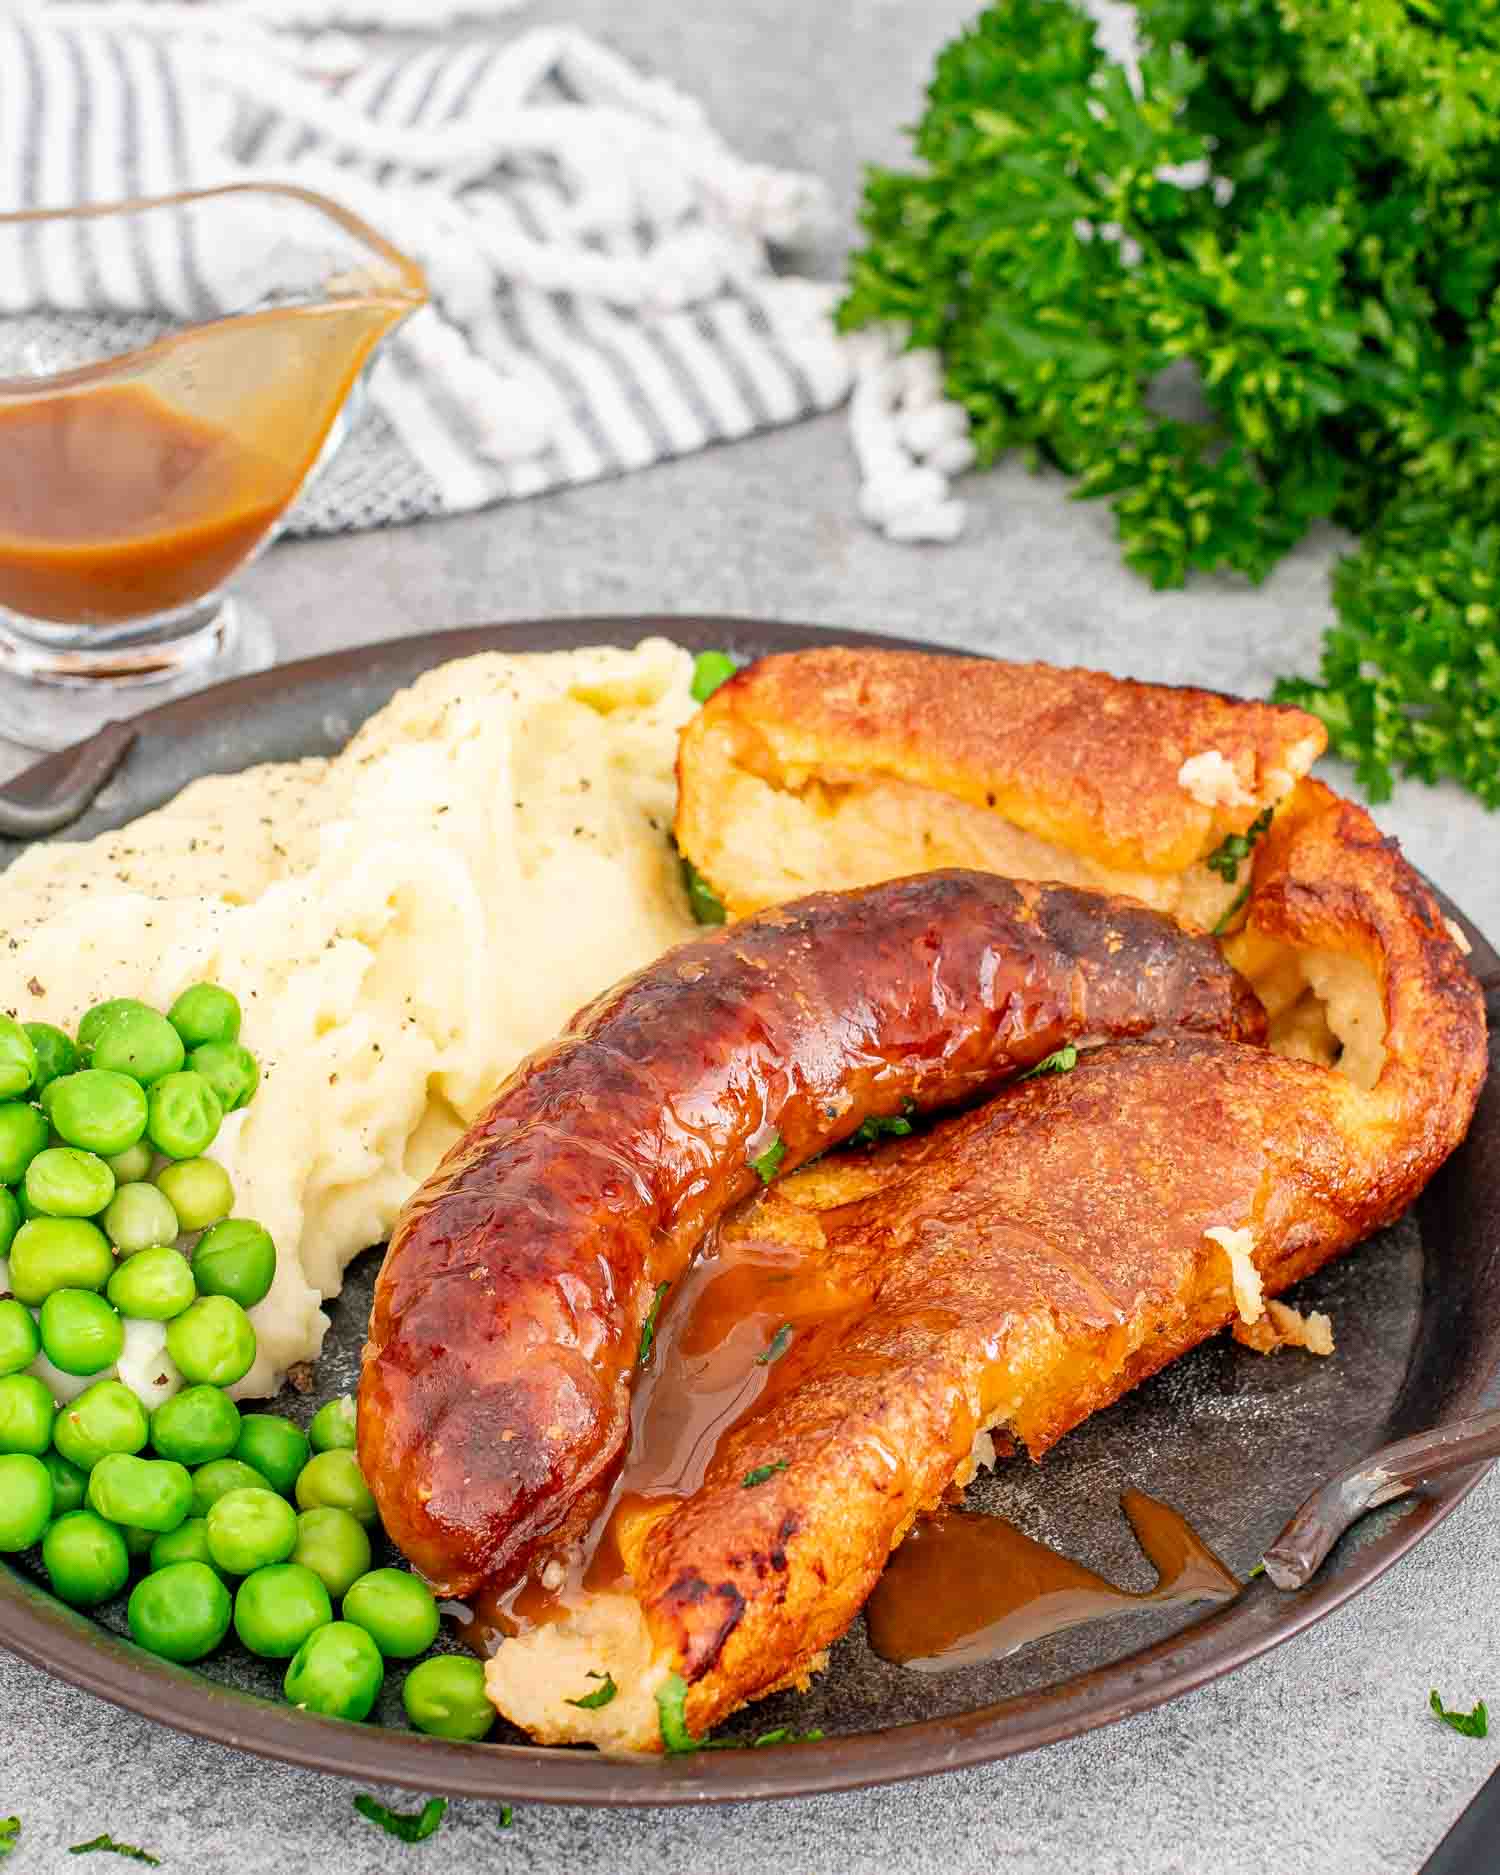 a serving of toad in the hole with gravy along mashed potatoes and peas on a plate.